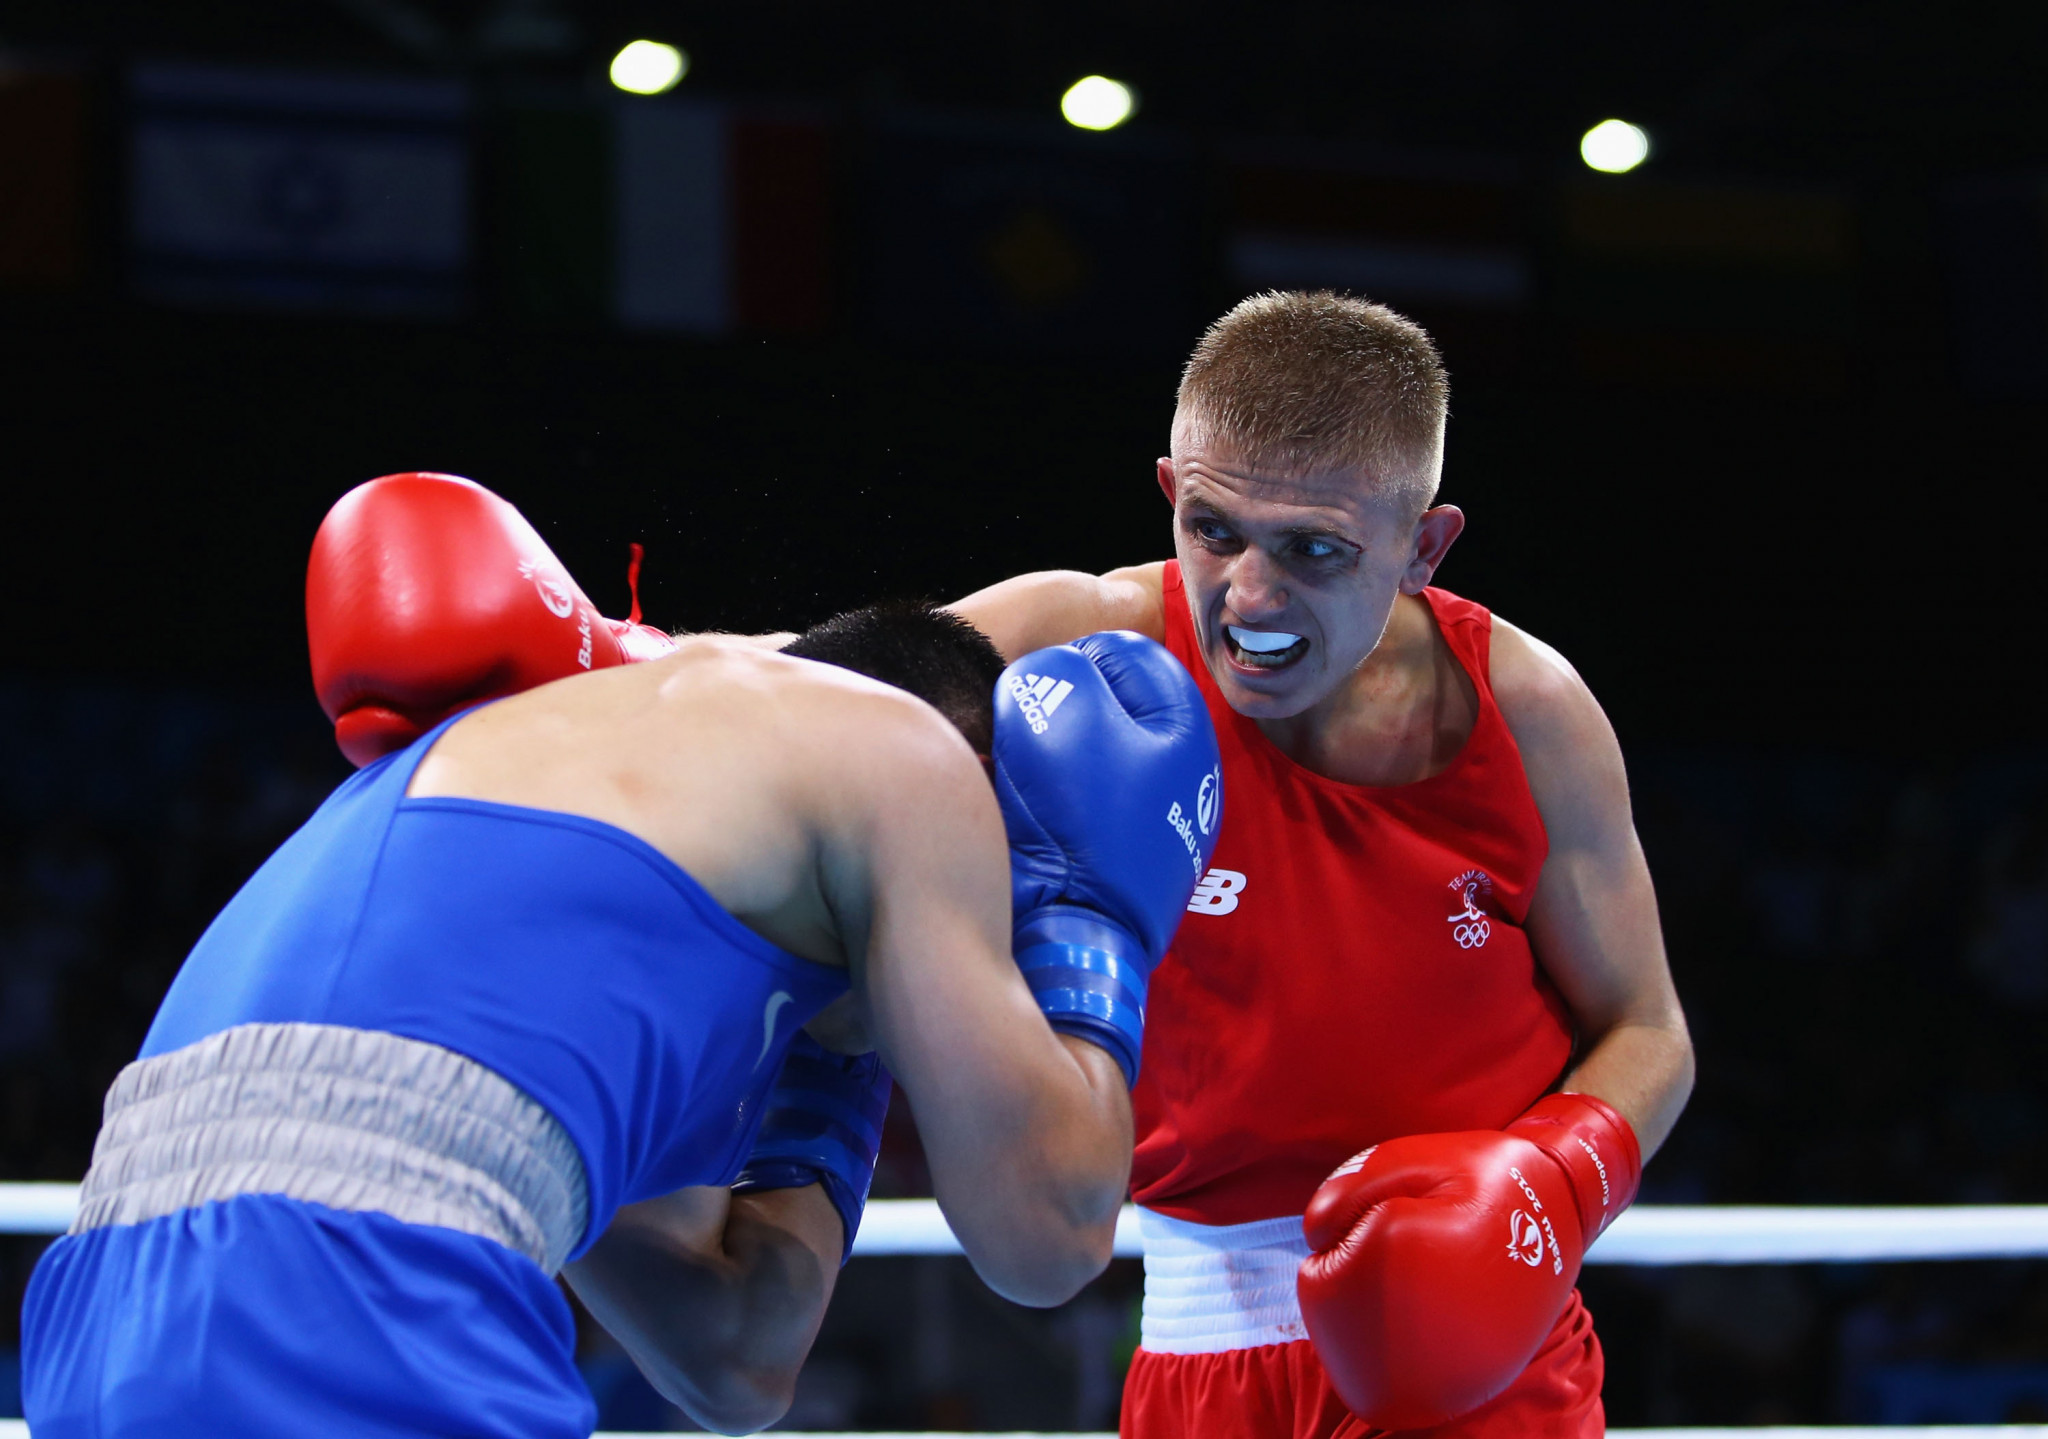 Ireland's Kurt Walker won his opening bout of the AIBA World Championships ©Getty Images